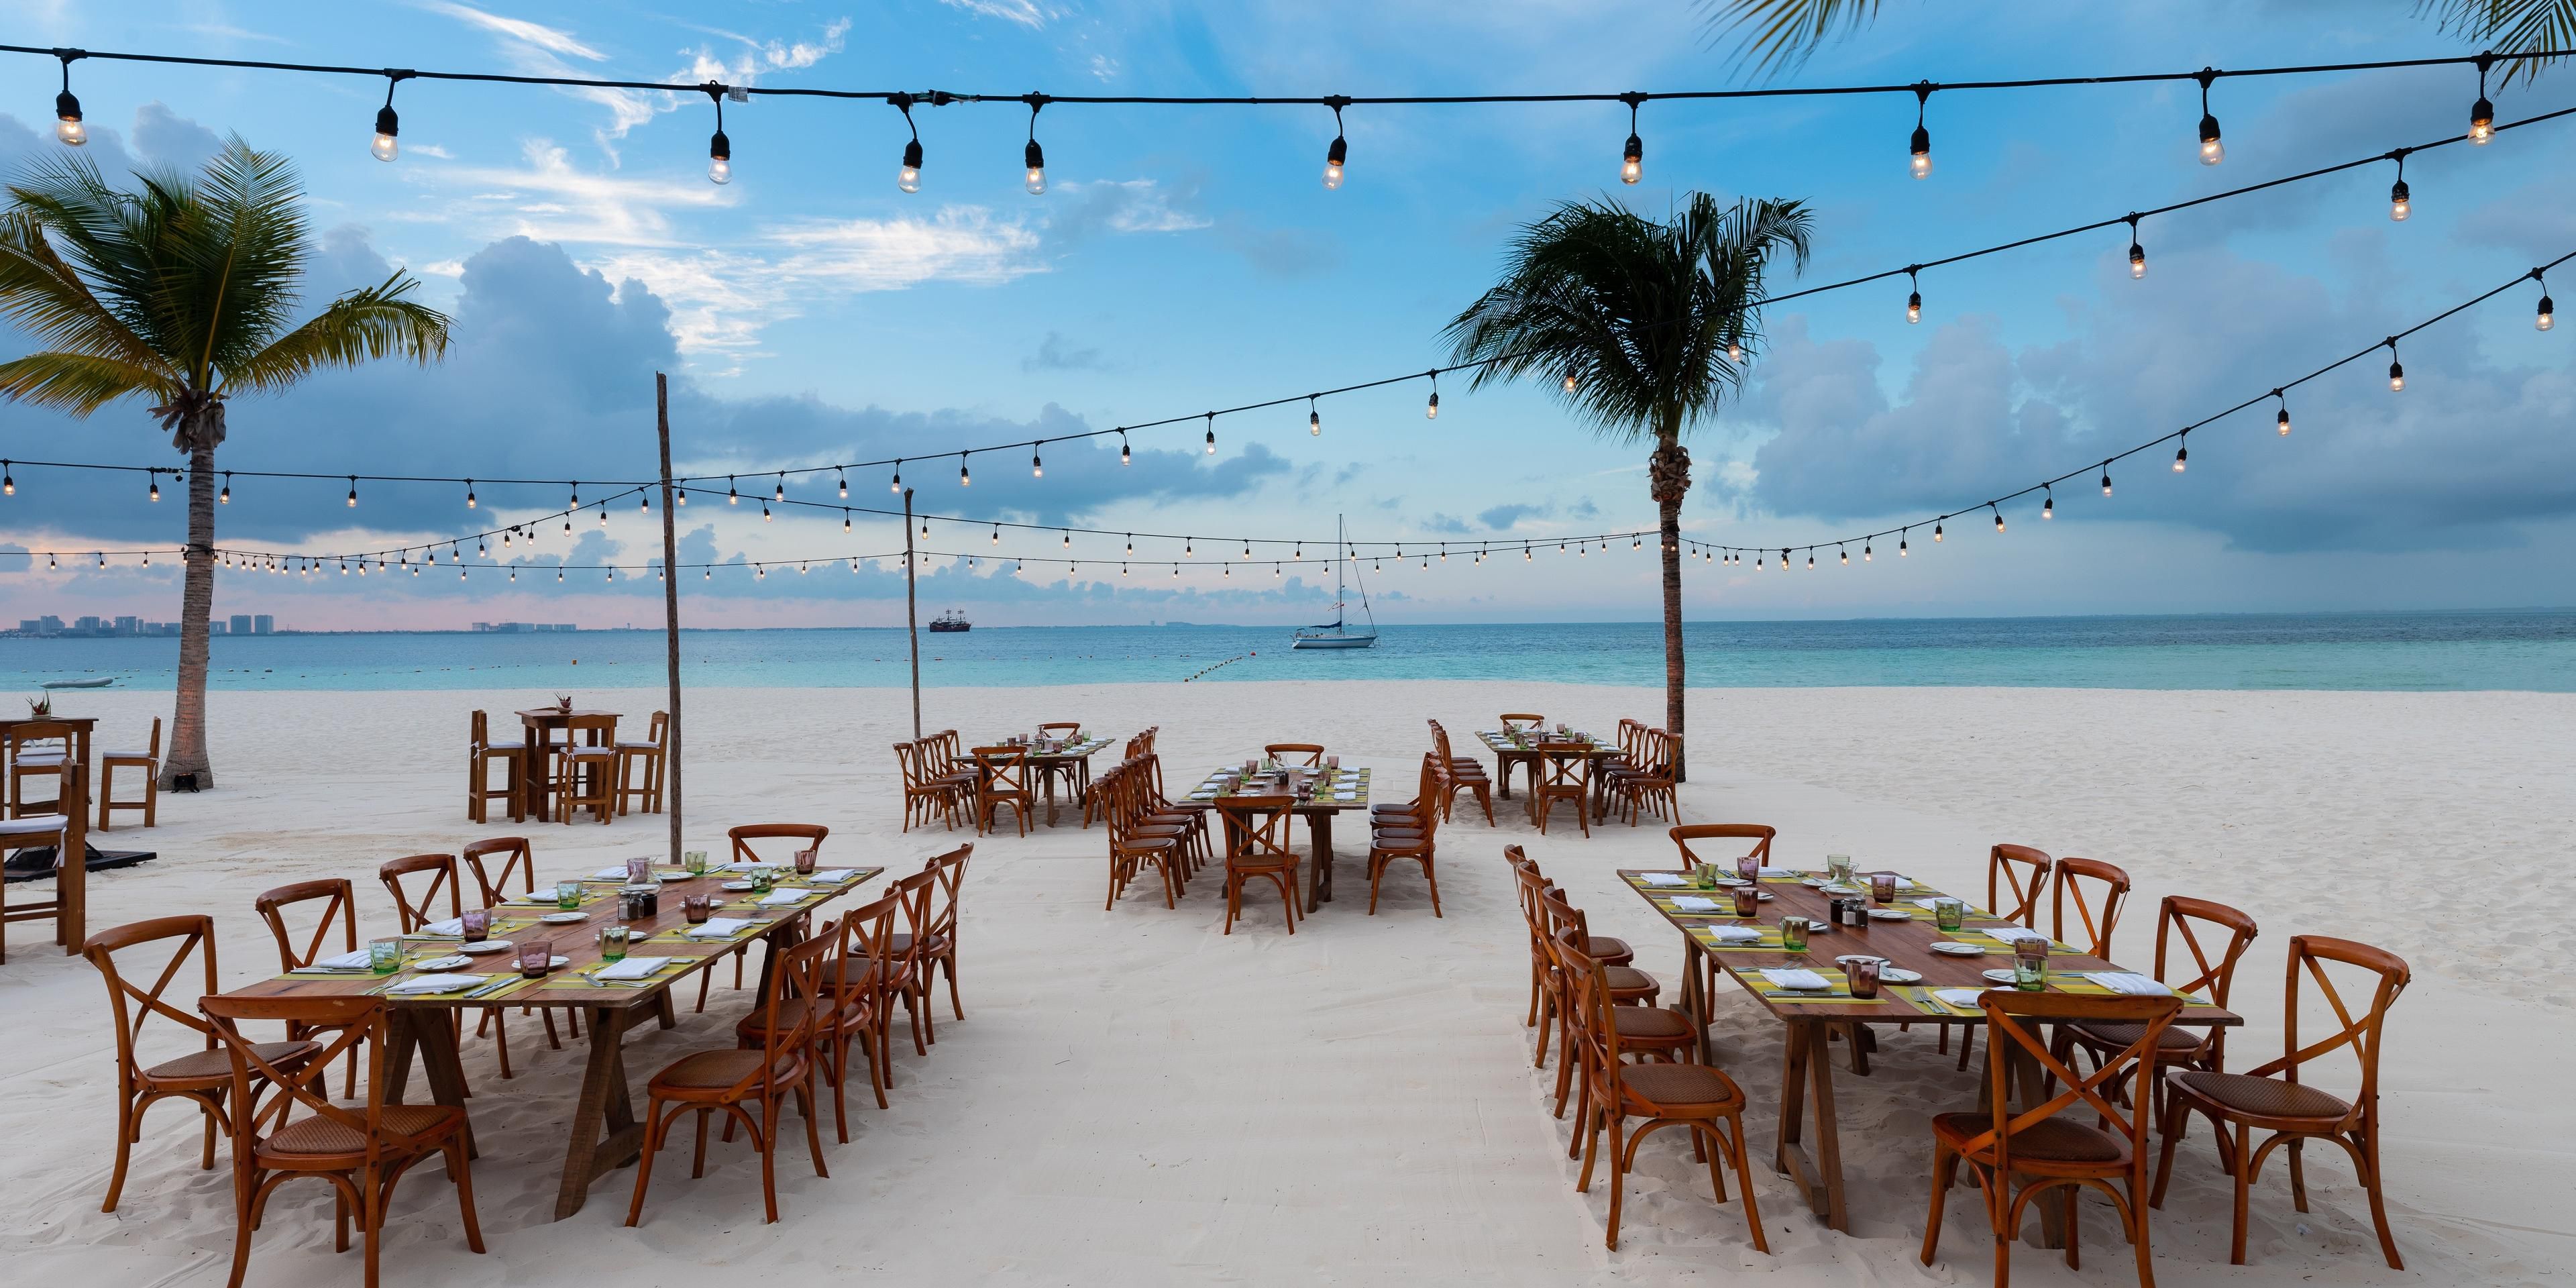 Your destination wedding in Cancun is here. From our breathtaking oceanfront venue to a beautiful garden, wonderful ballrooms, a private pool and a terrace with a unique view. We partner with the most prestigious wedding planners who will take charge of everything so you can enjoy every minute of your special day.